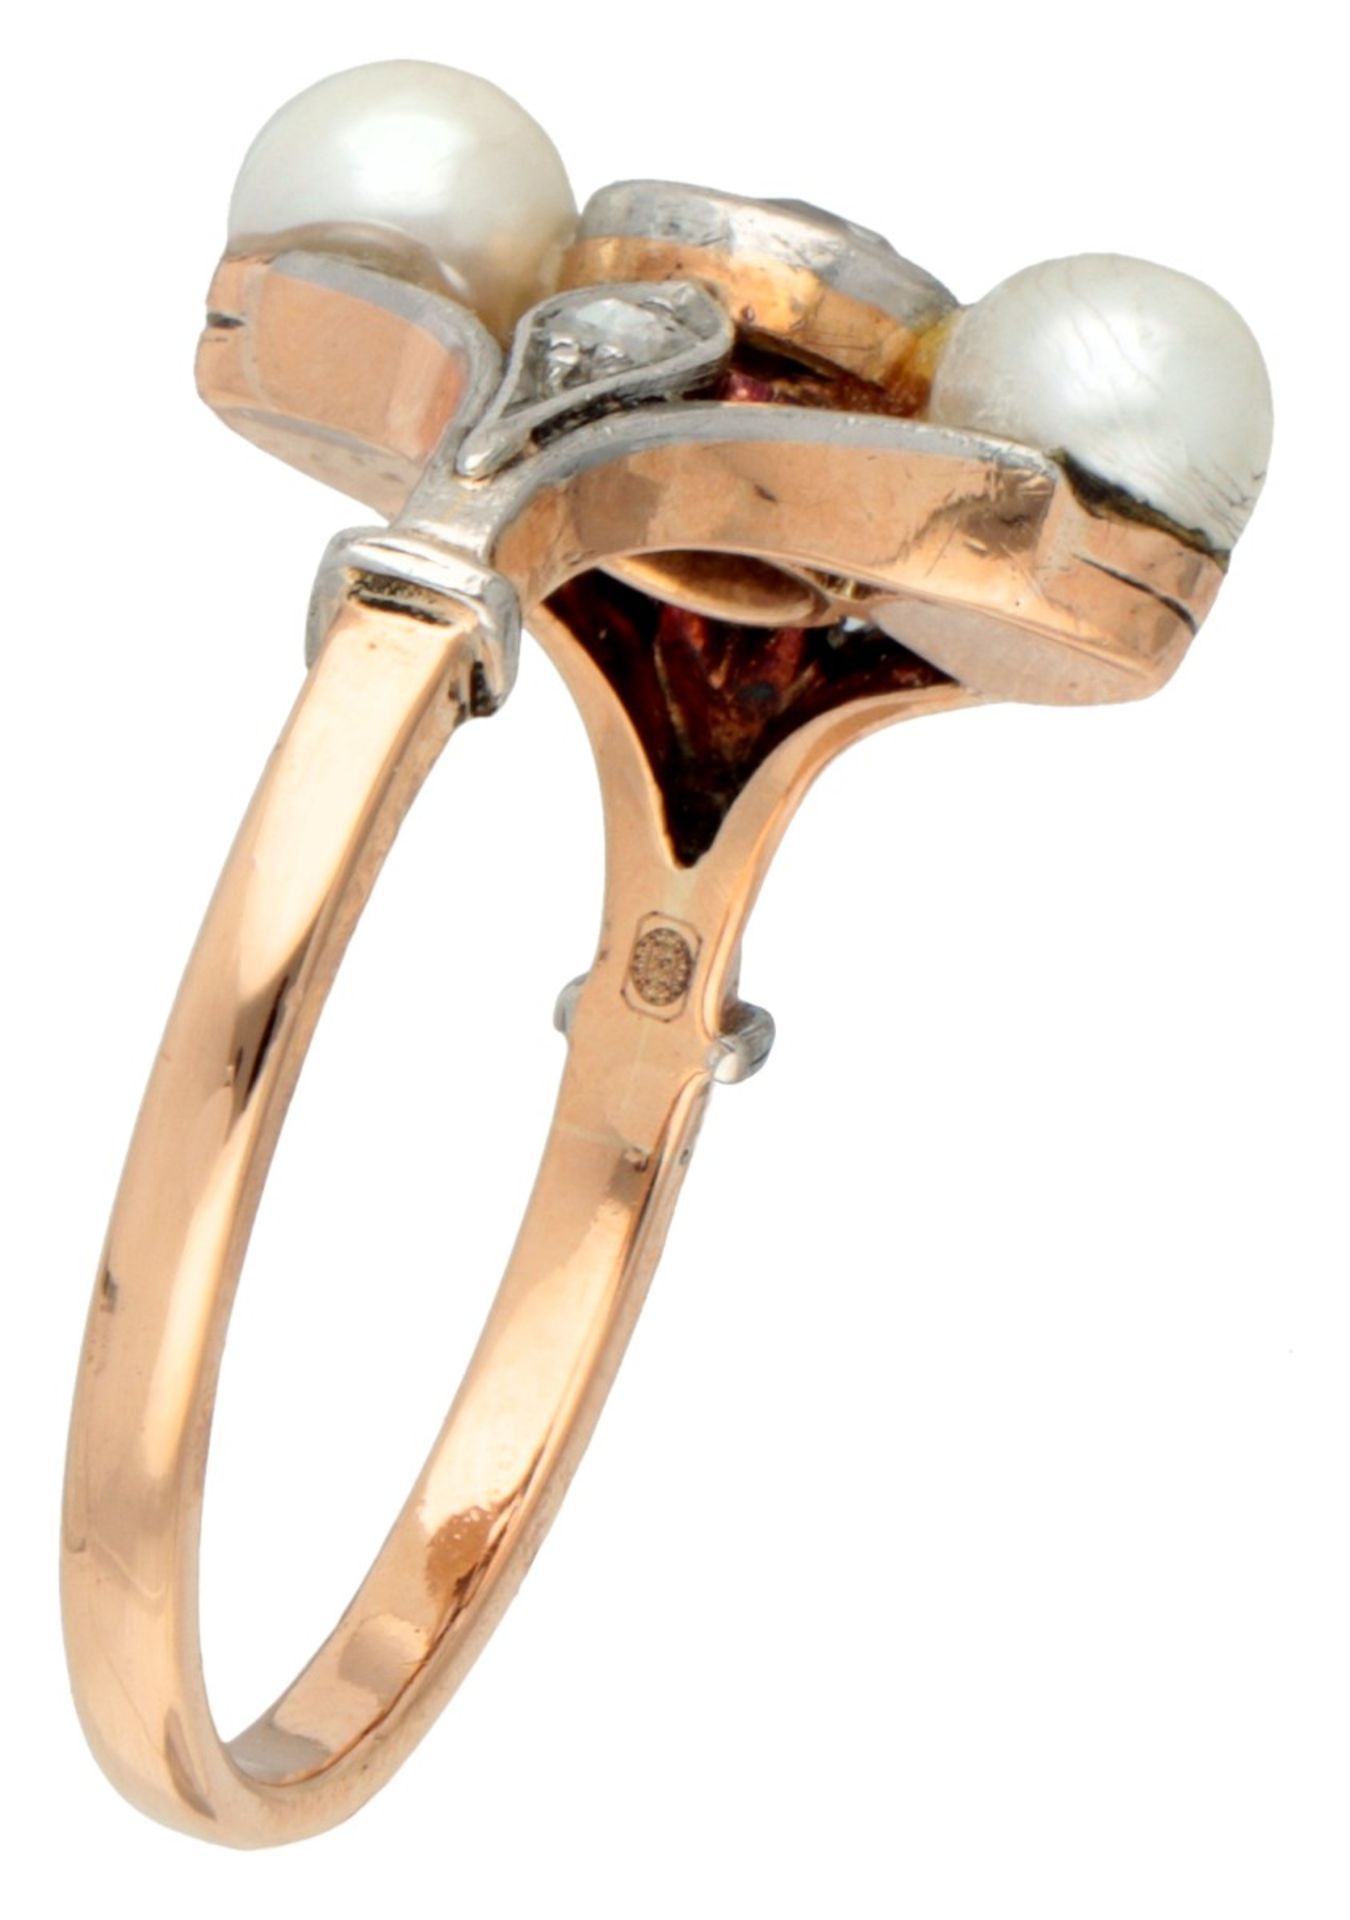 Antique 14K. yellow gold and Pt 900 platinum ring set with diamond and pearl. - Image 2 of 3